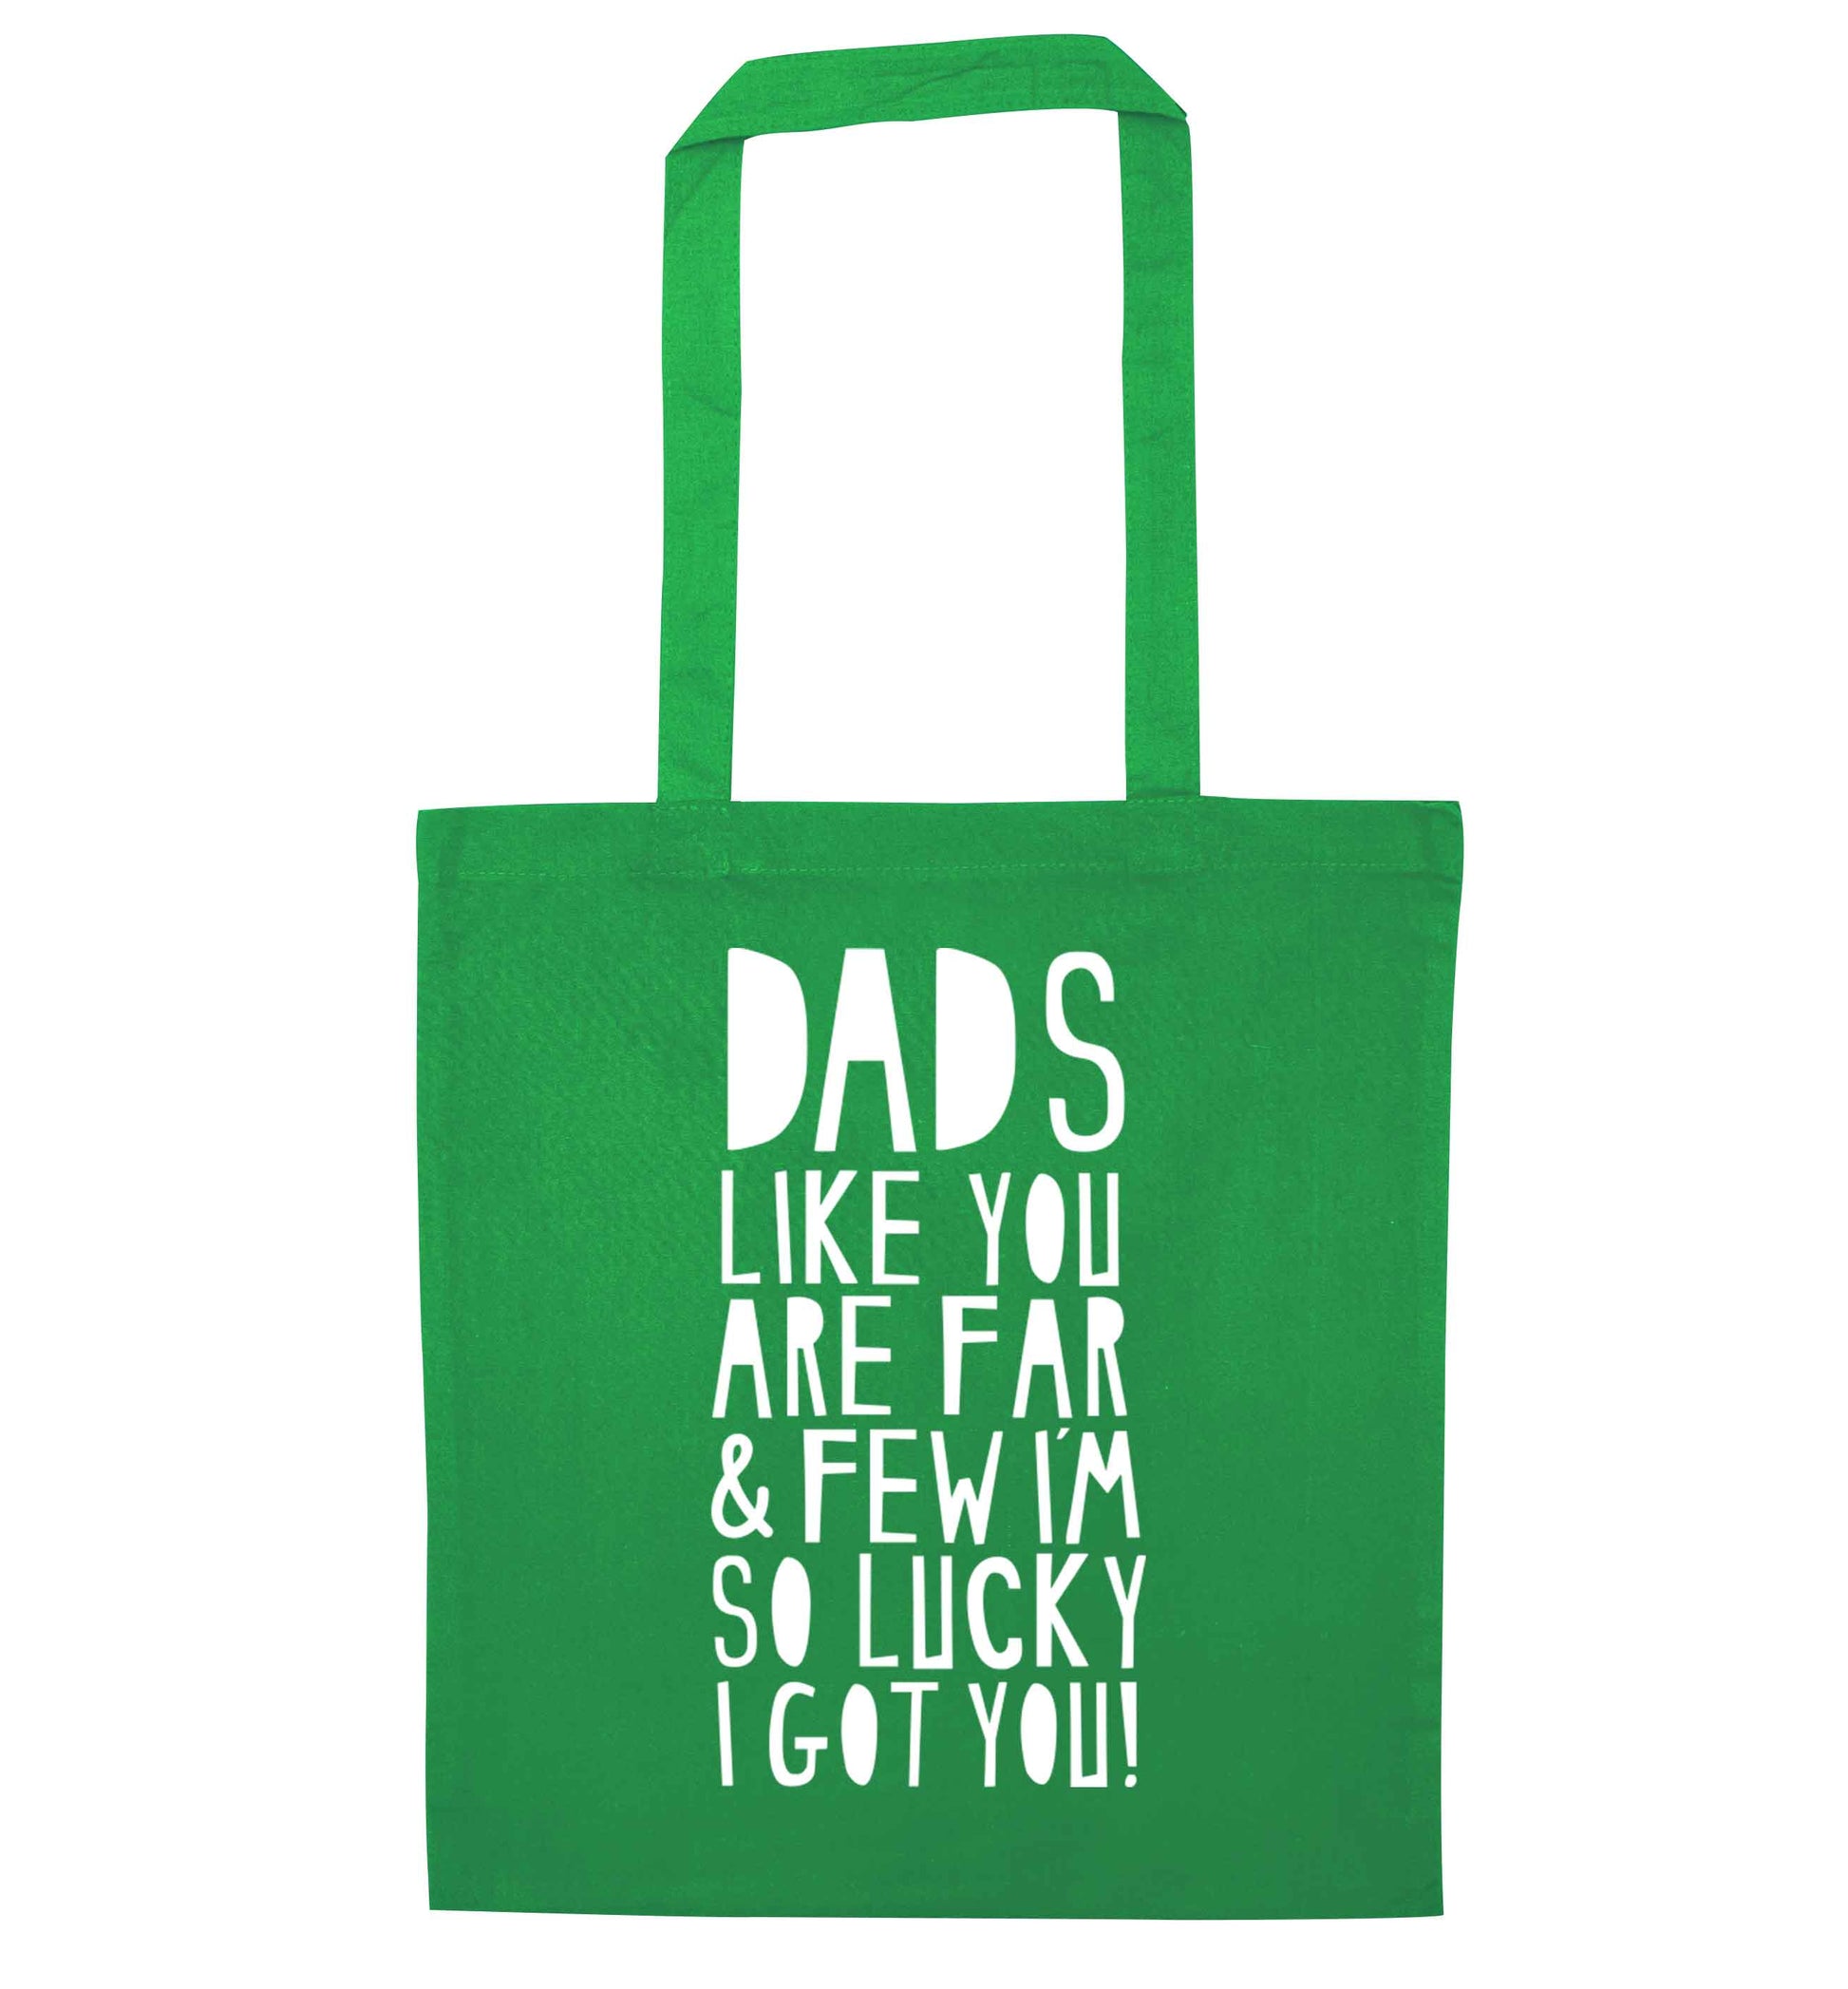 Dads like you are far and few I'm so luck I got you! green tote bag